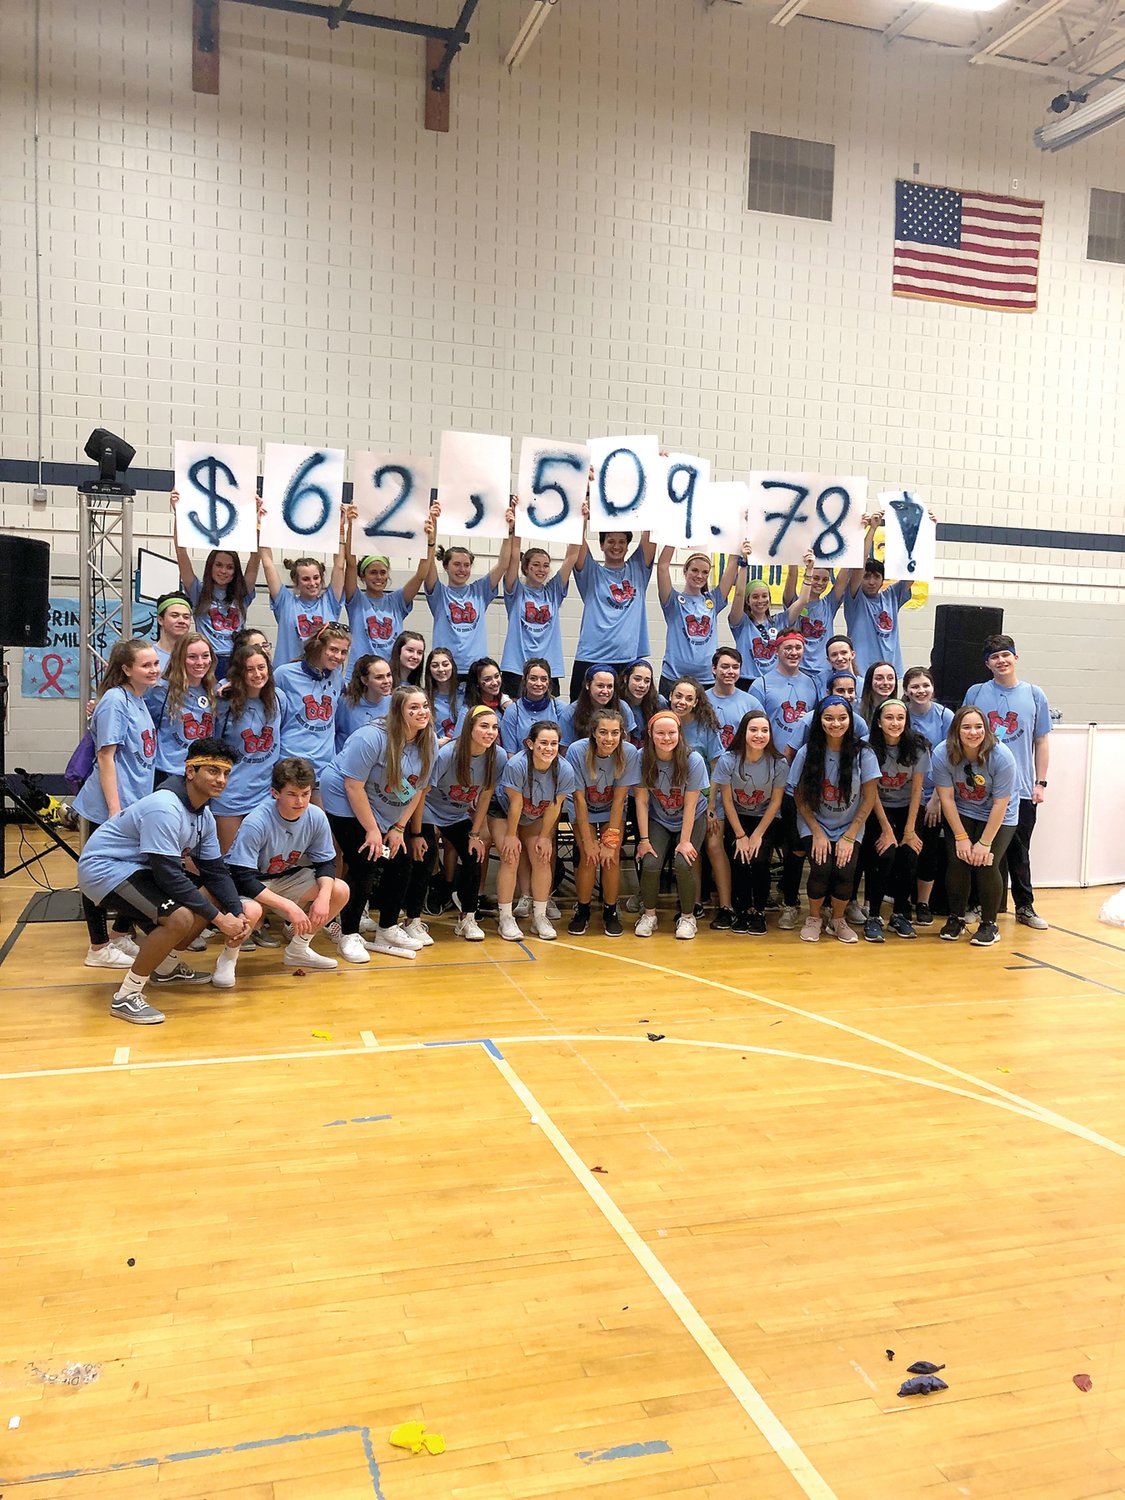 Central Bucks East students raised more than $62,000 in support of childhood cancer research and children diagnosed with cancer at their school’s Mini-THON on April 5.